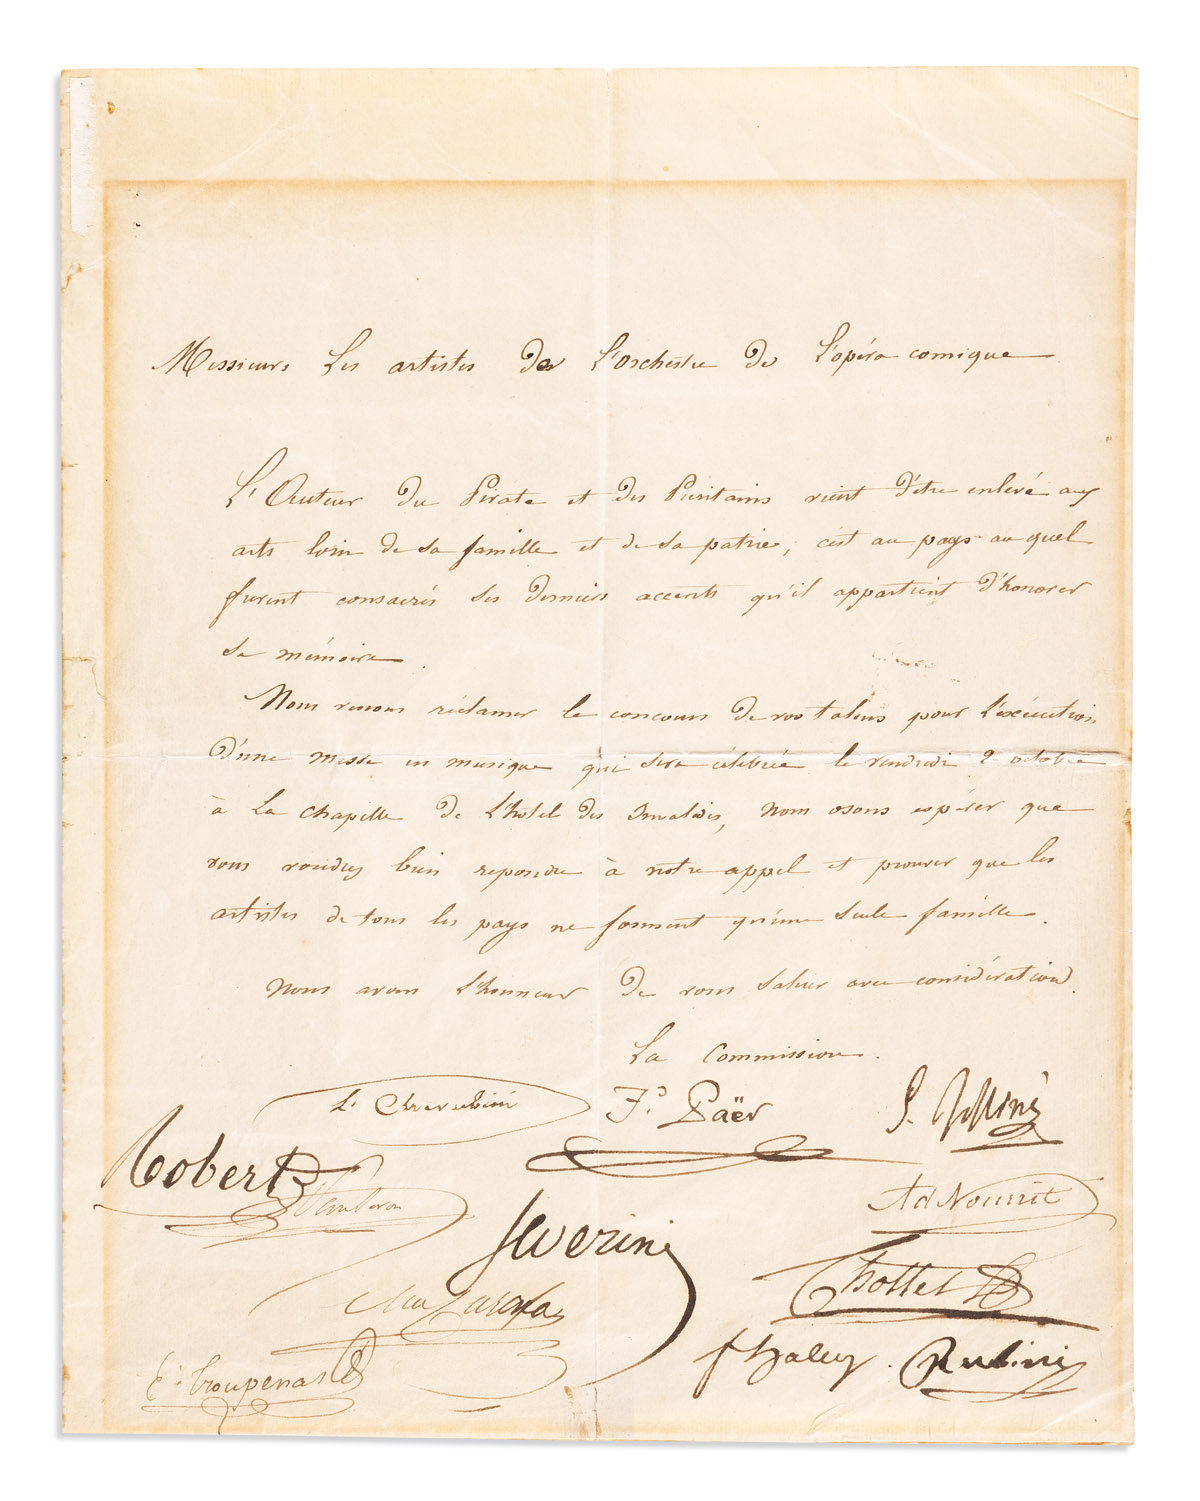 (MUSICIANS--19TH CENTURY.) Letter Signed by the committee organizing the performance of a funeral mass for Vincenzo Bellini, to the art